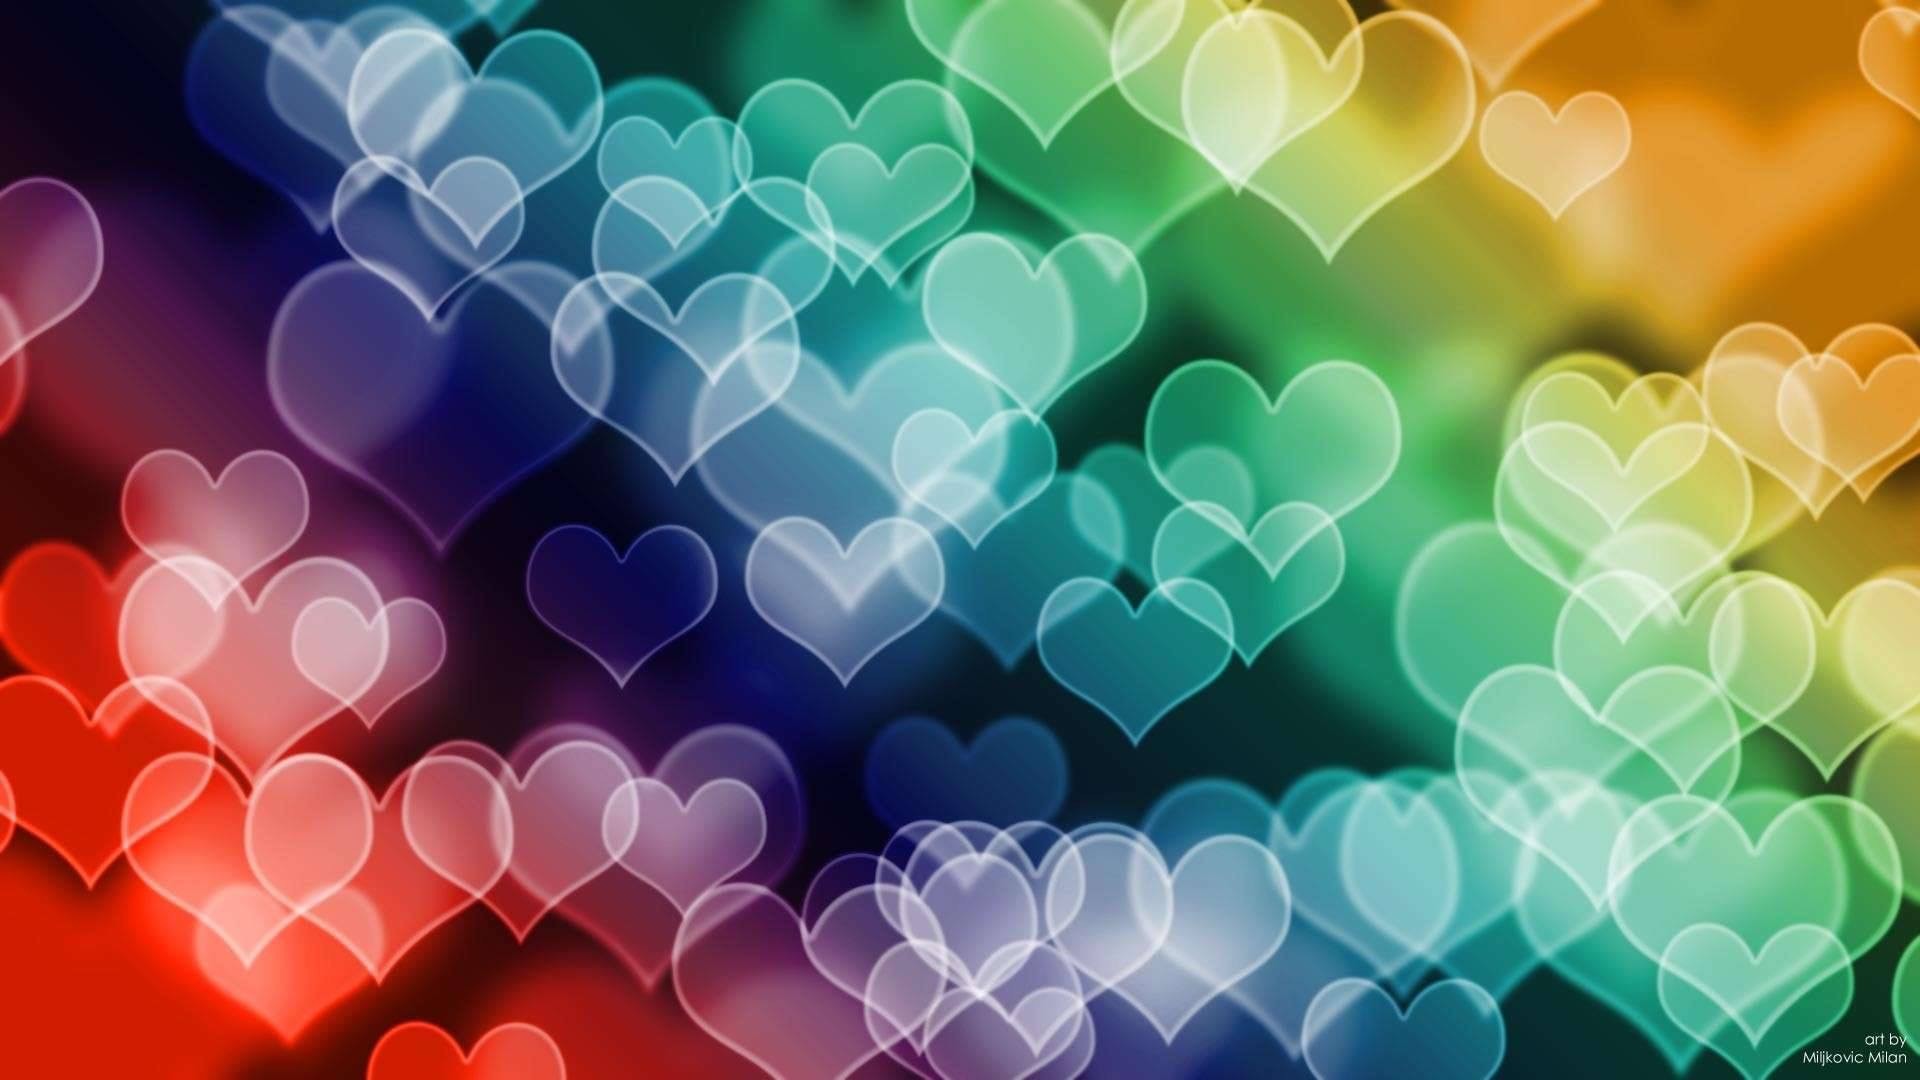 Colored Hearts Hd Wallpaper In Full Hd From The Valentine - Heart Wallpaper Hd - HD Wallpaper 